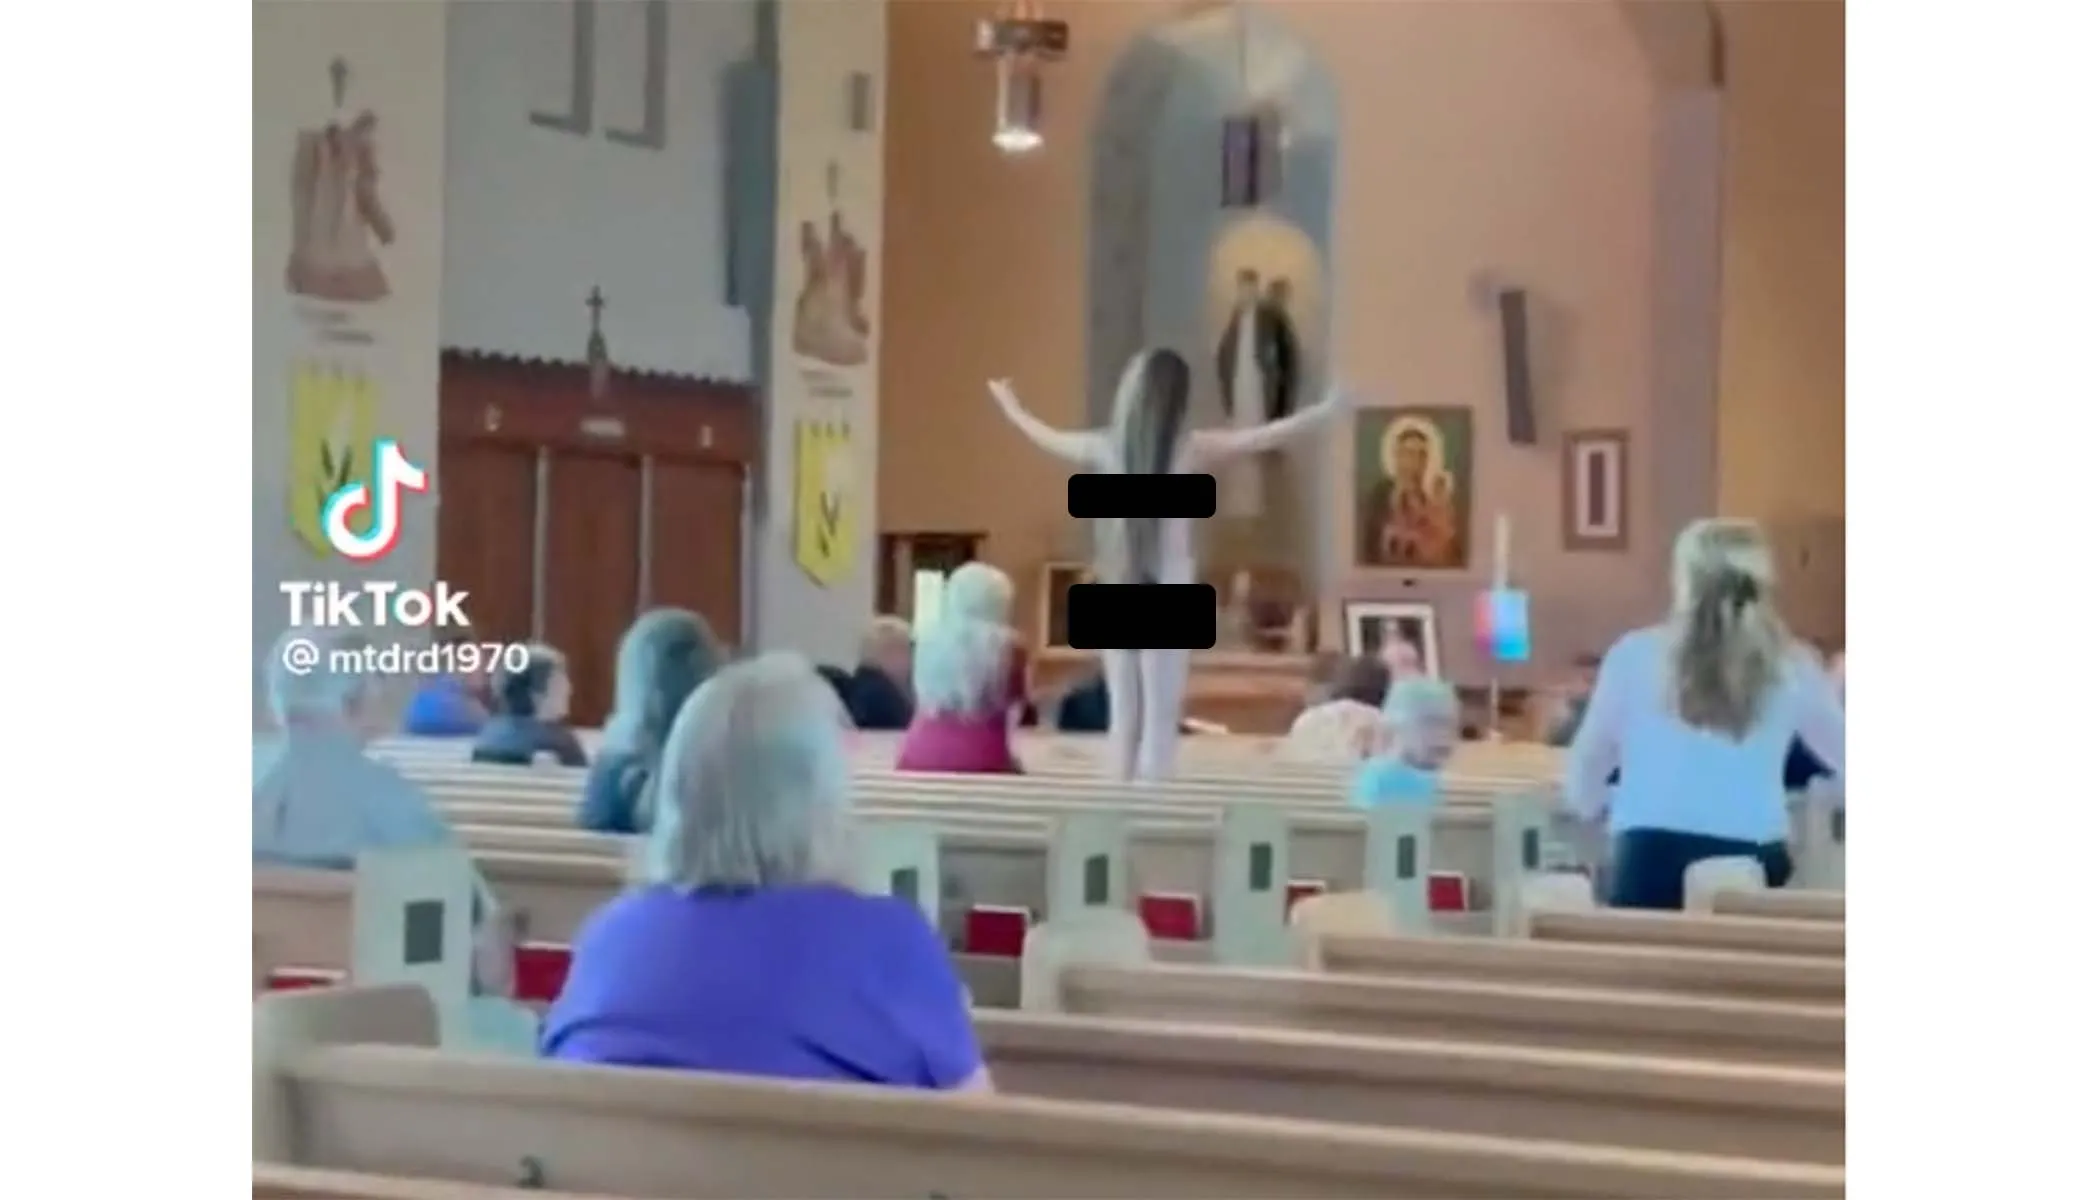 Pro-abortion activists shown disrupting a Mass at St. Veronica Parish in Eastpointe, Michigan. A video said the incident happened on June 12, 2022.?w=200&h=150